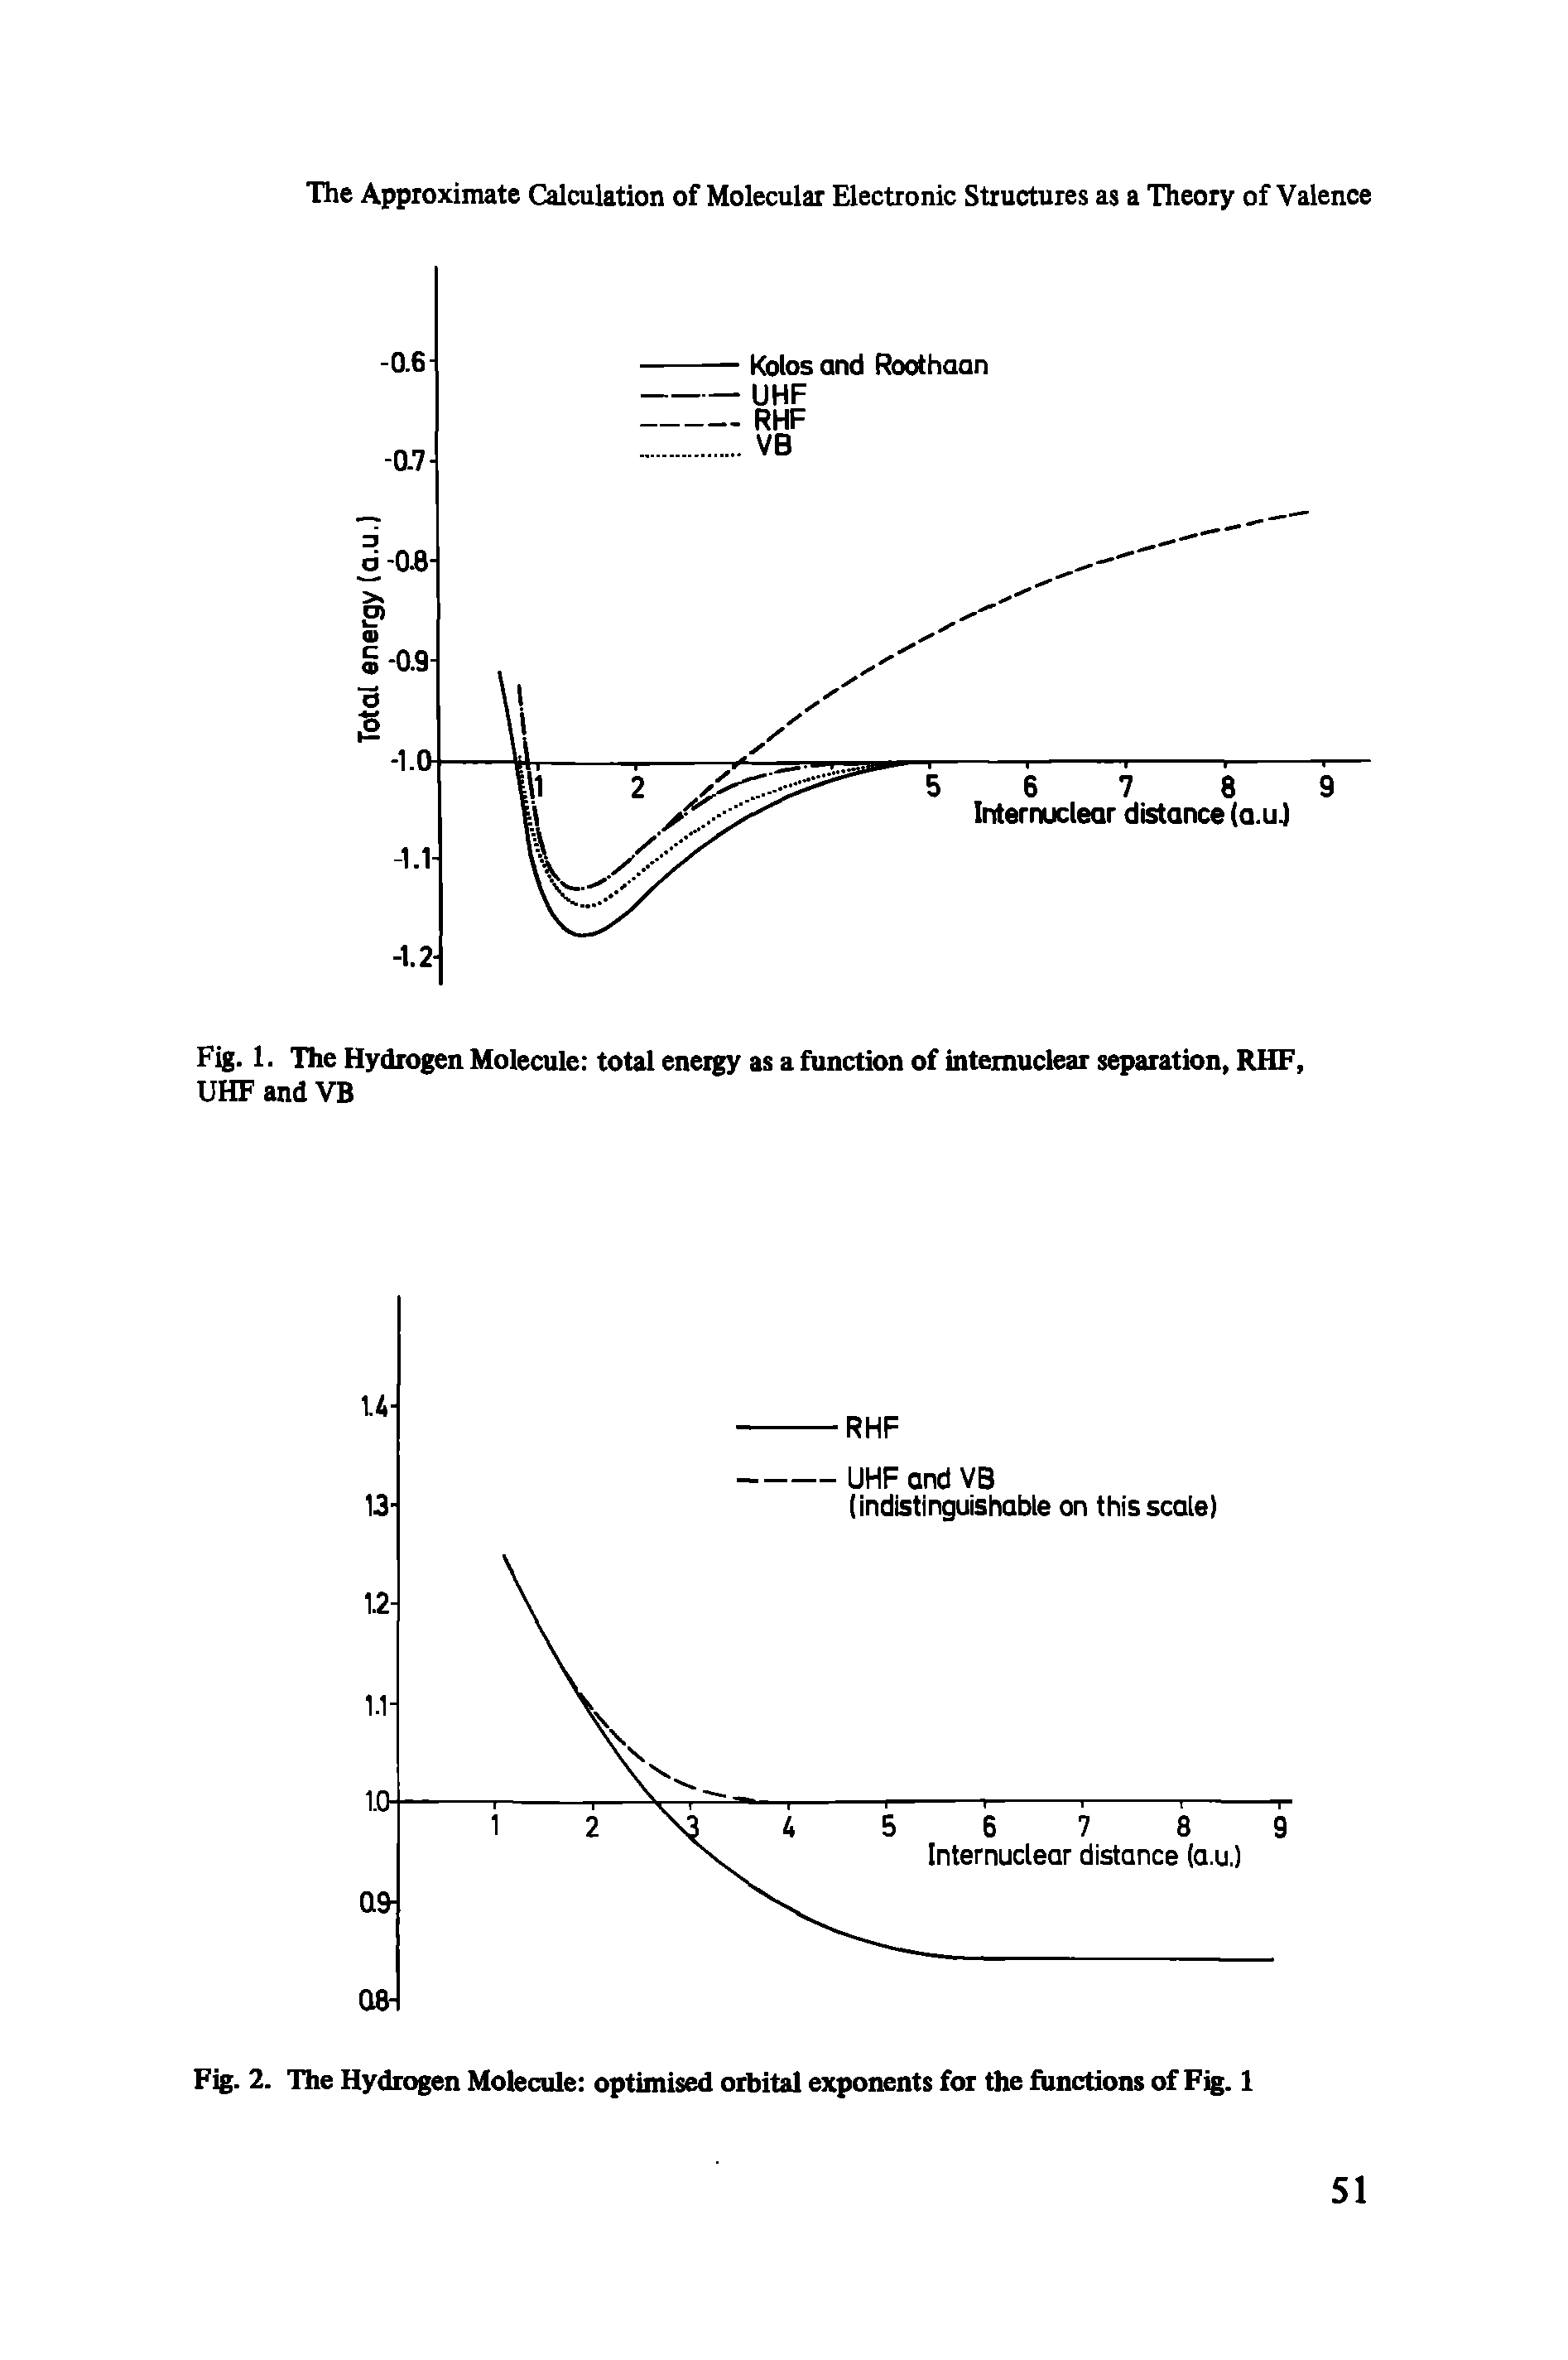 Fig. 1. The Hydrogen Molecule total energy as a function of intemuclear separation, RHF, UHF and VB...